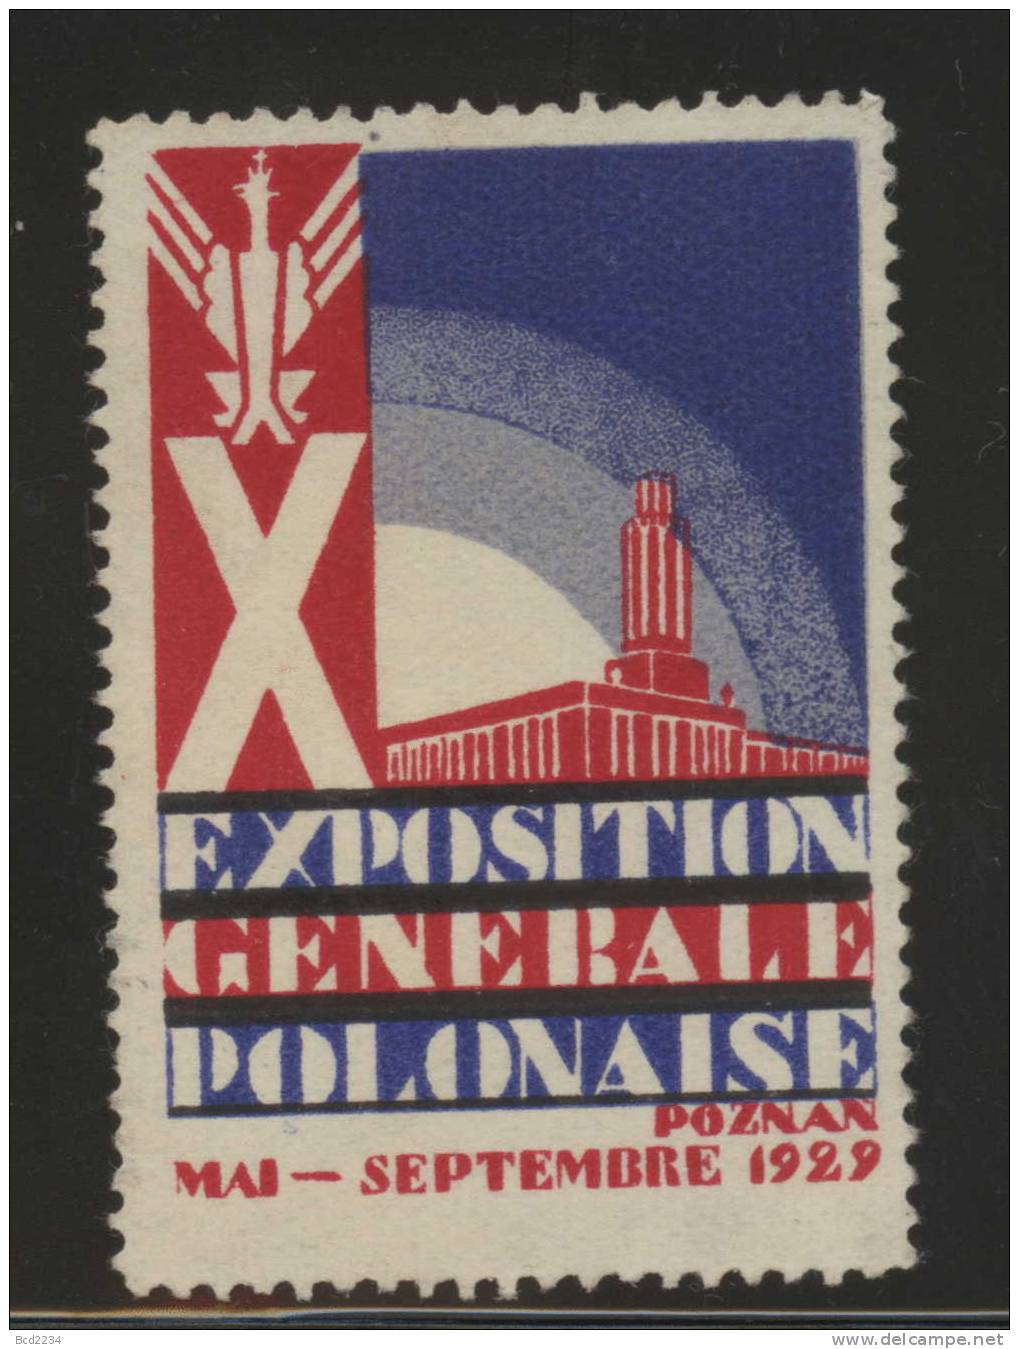 POLAND 1929 POZNAN EXHIBITION TRADE FAIR POSTER STAMP TYPE 5 FRENCH WRITING NO GUM - Revenue Stamps